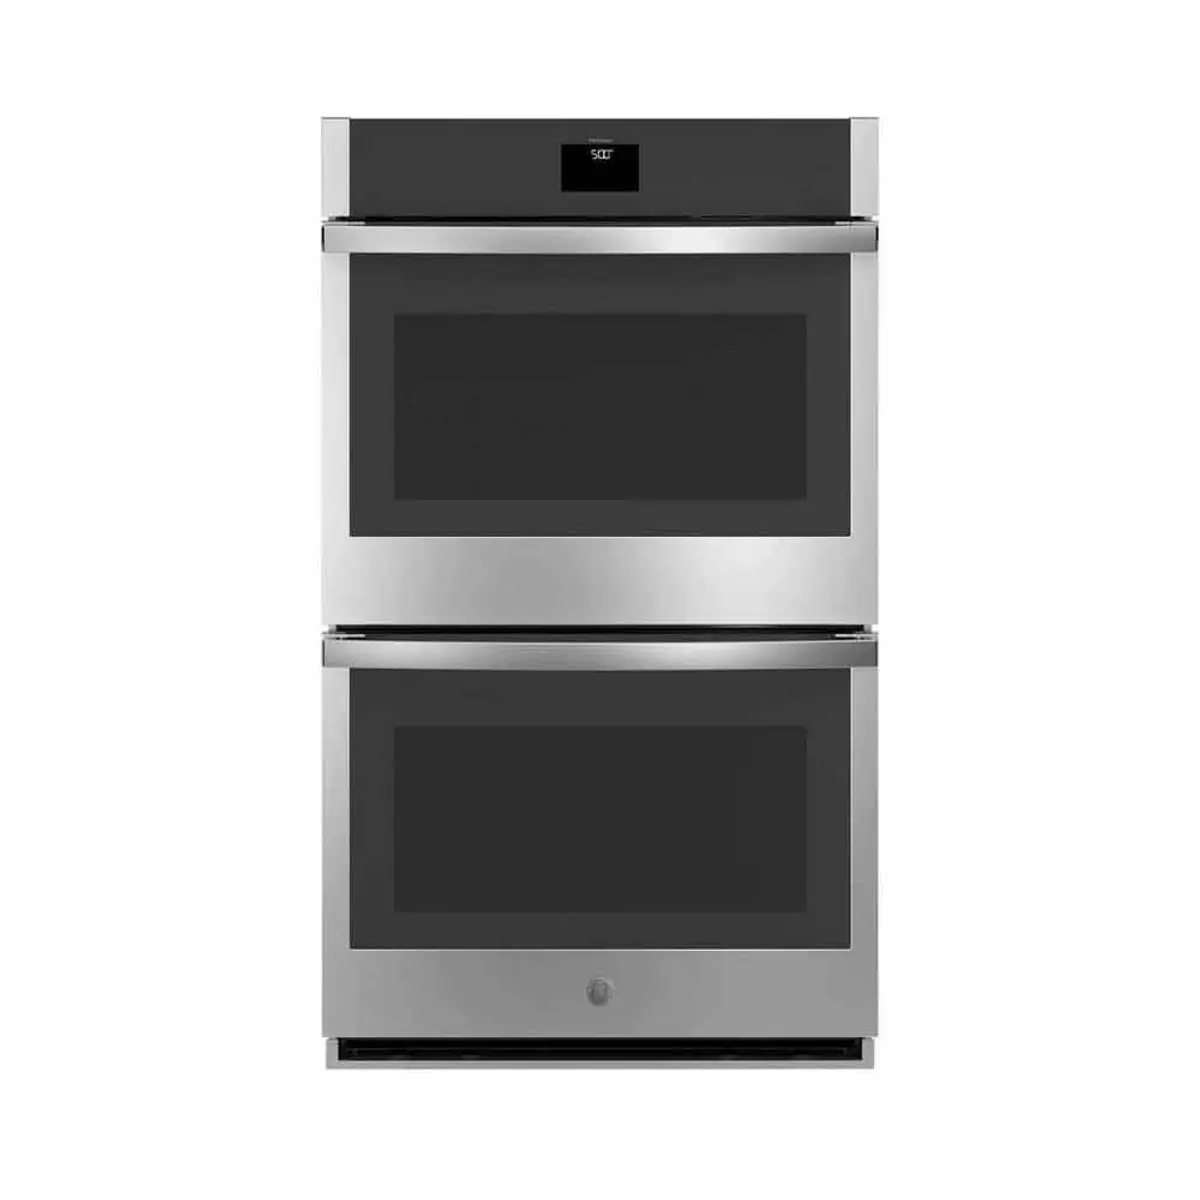 GE JTD5000SNSS 30 Inch Electric Double Wall Oven